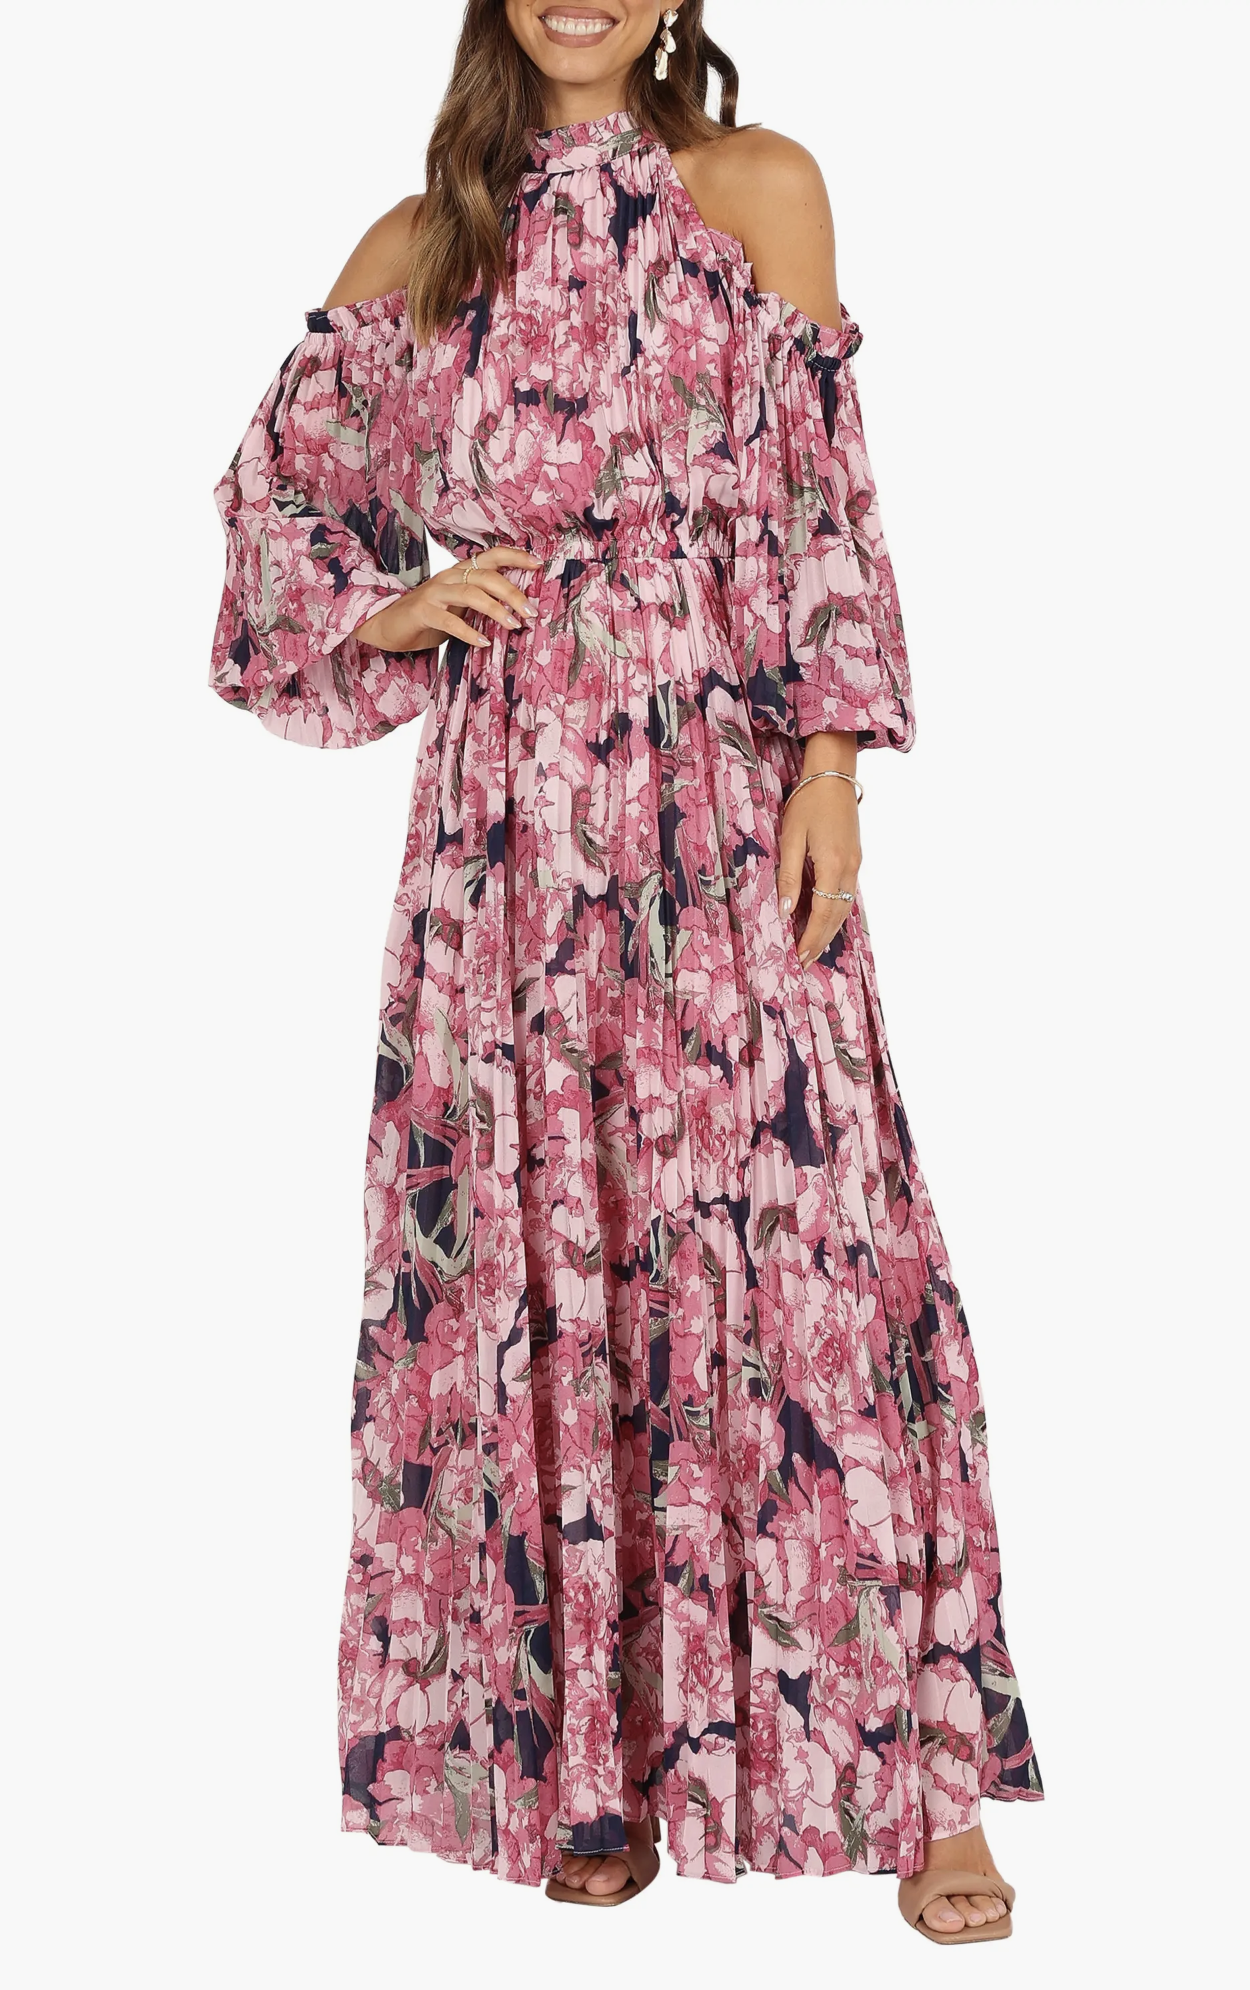 Embrace the warmth and vibrancy of the season with our curated selection of floral maxi dresses. From elegant daytime soirees to enchanting evening events, discover the perfect blend of style, comfort, and sophistication for every occasion. Floral Maxi Dress | Floral Maxi Dresses | Floral Maxie Dress | Florals Maxi Dress | Floral Maxi Dress Summer | Floral Maxi Dressed | Floral Maxis Dress | Floral Maxi Dresses Summer | Floral Maxi Dress With Sleeves | Floral Dress | Flowy | Maxi Dress Outfit